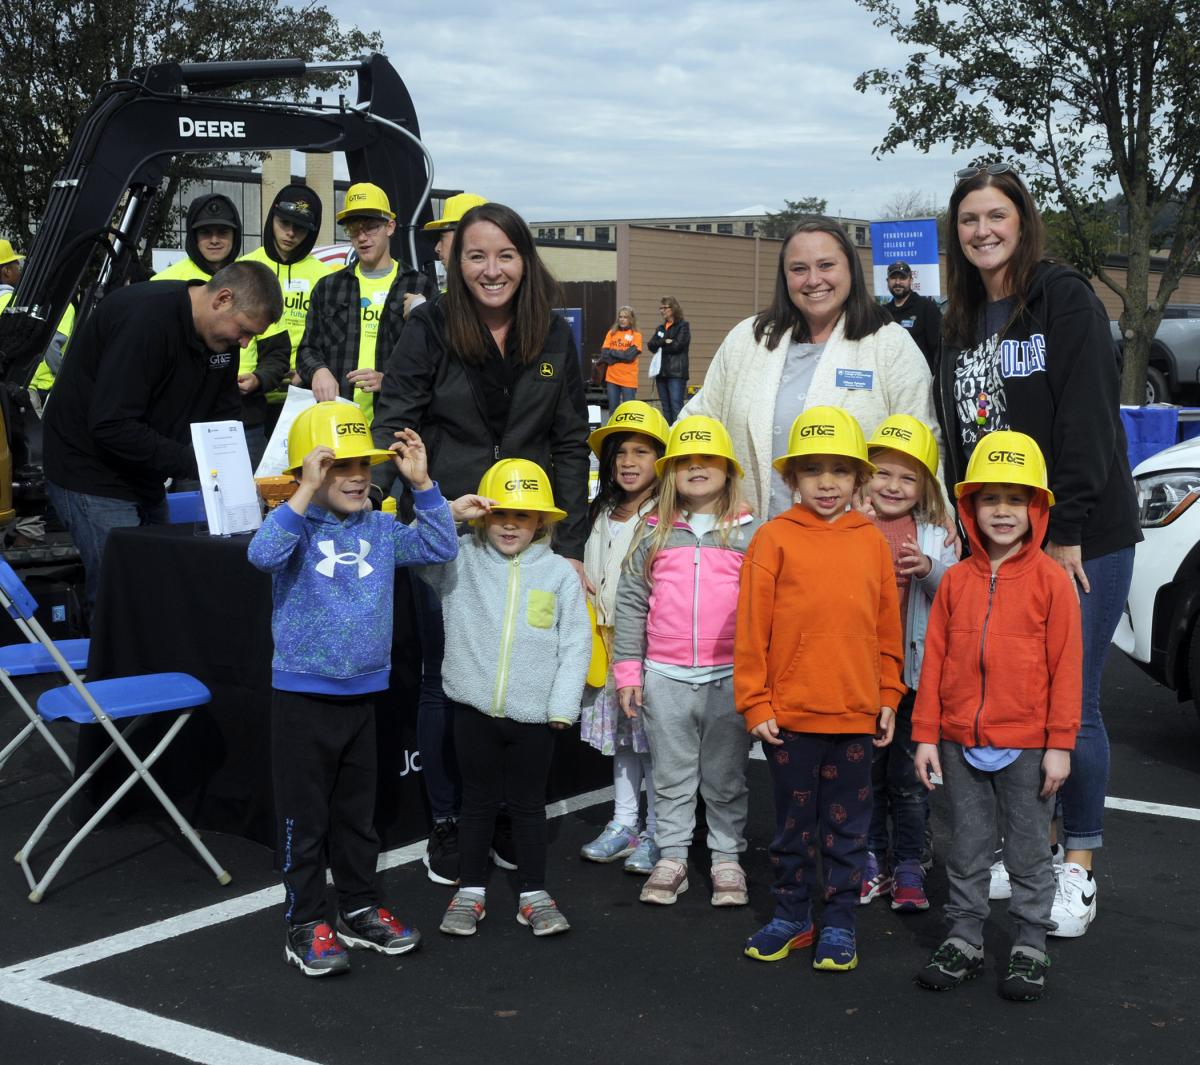 ... as Samantha O'Donnell-White (in Deere garb), GT&E's director of human resources, handed out commemorative hard hats to all – including this next-generation group of builders from the Dunham Children's Center. Accompanying the group are Tiffany L. Tyhanic (with name tag), childcare teacher, and Valerie L. Vonada, childcare assistant teacher.